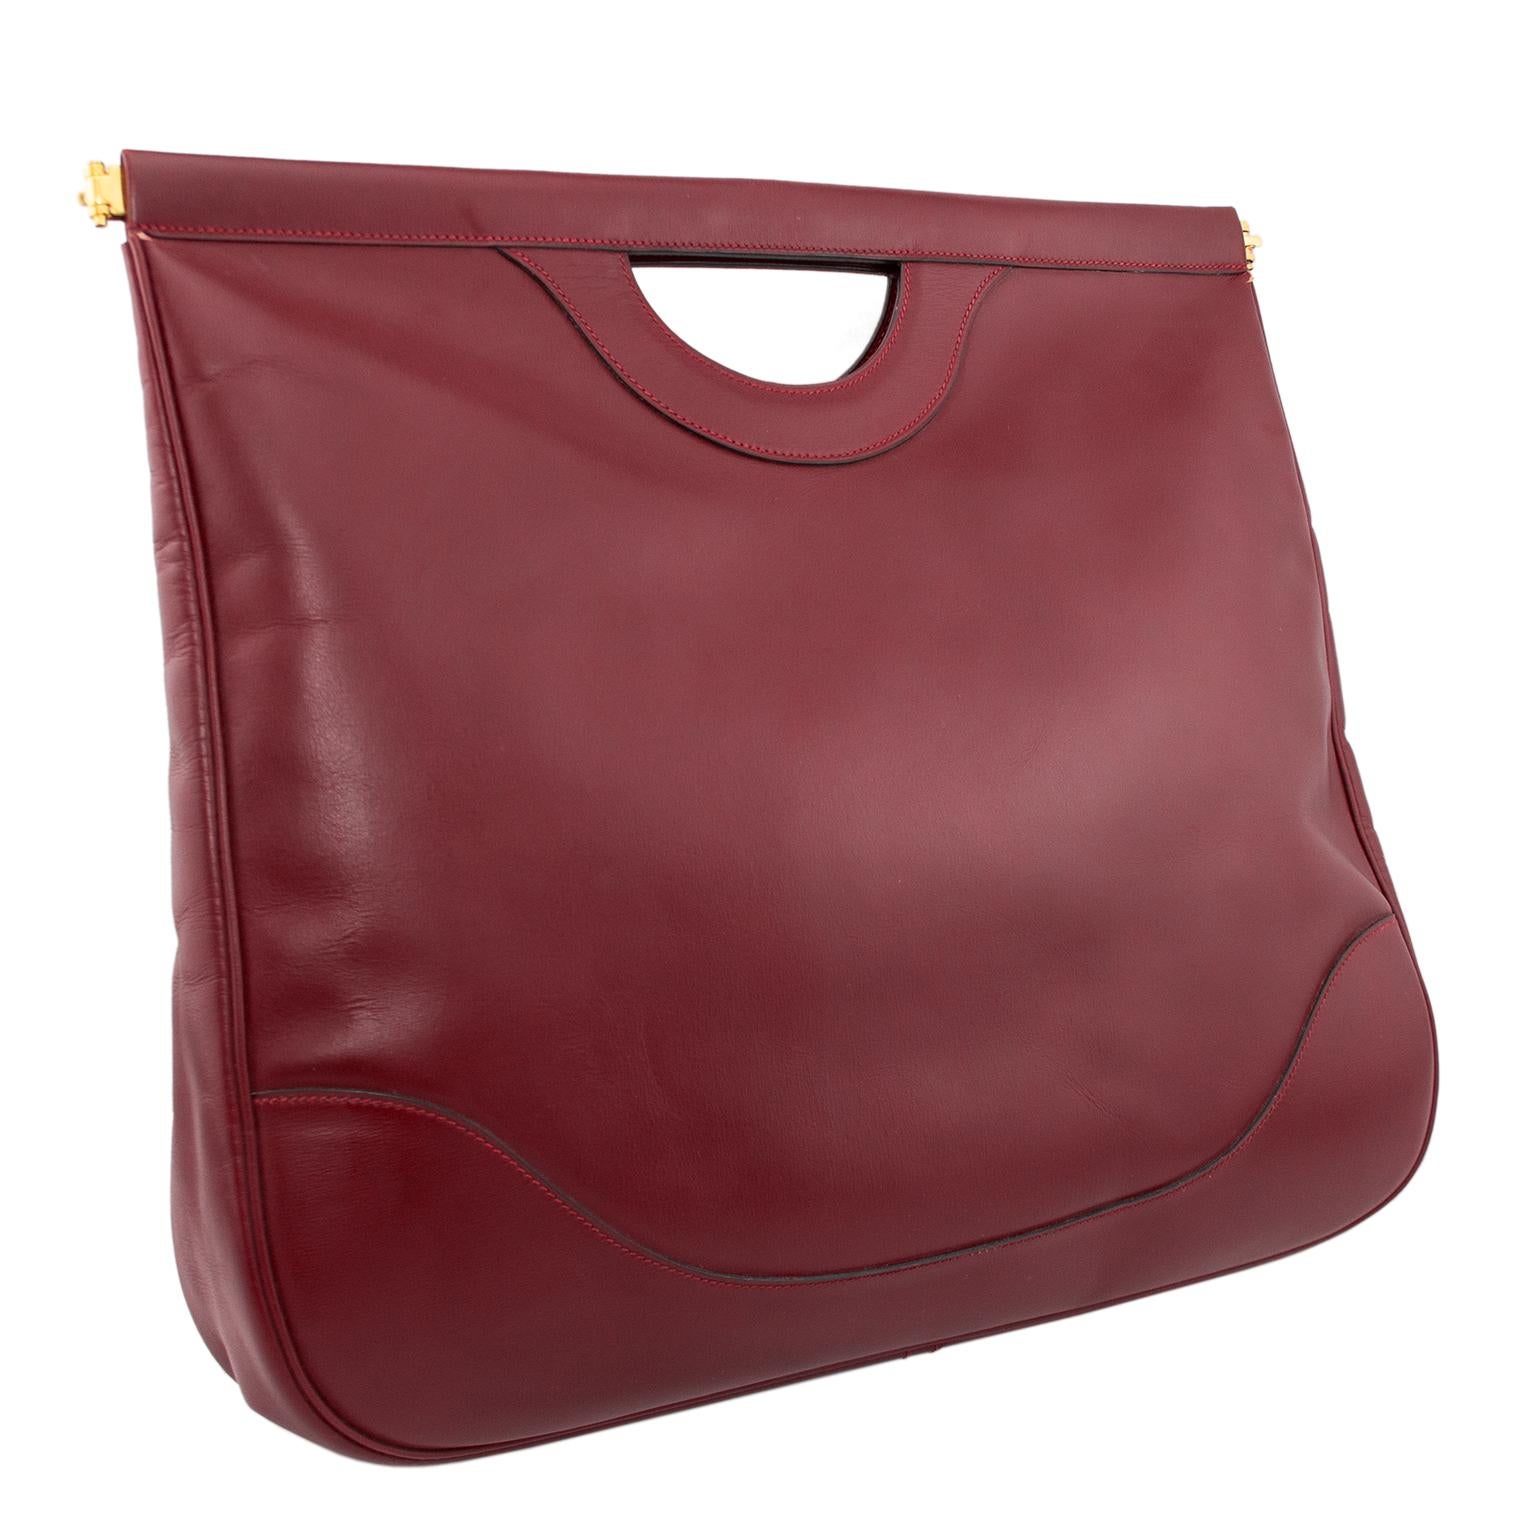 Late 1970's-early 1980's Hermes oversize foldable cut out handle shopper in burgundy box leather. Not often seen and this one is in perfect condition. Spring set metal opening allows great access. Very unique piece, can be worn 2 ways folded down as